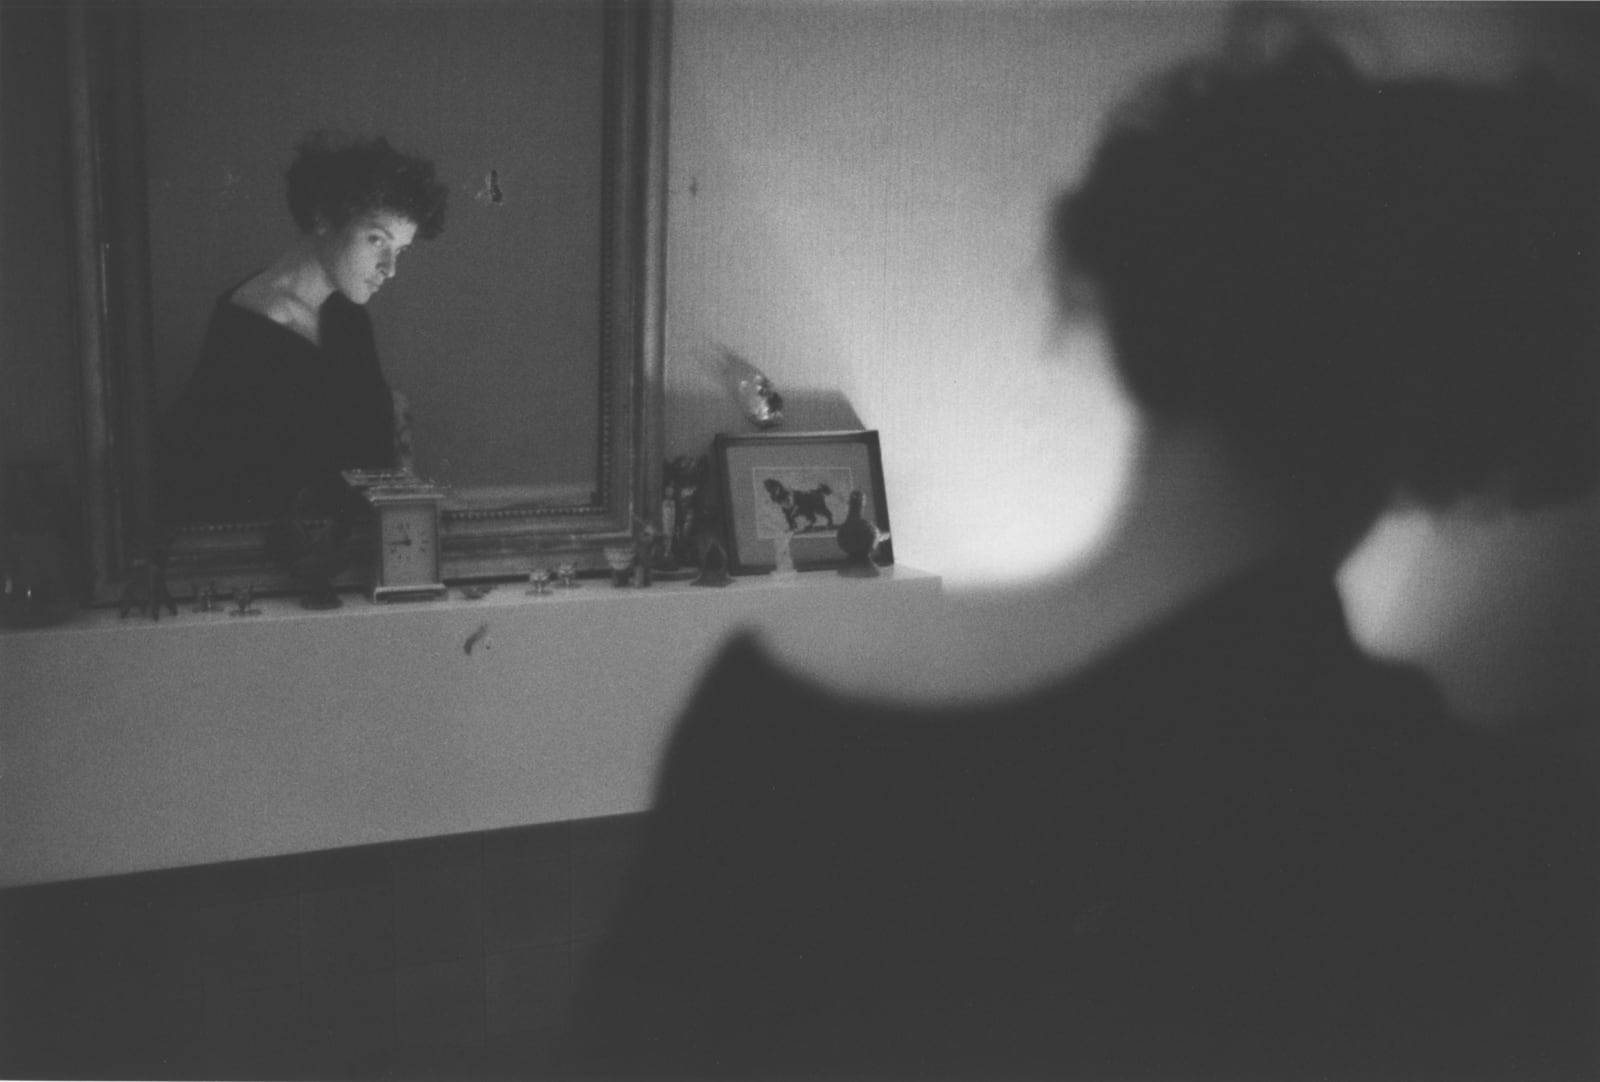 Tomio Seike, TSZ 90-37 Untitled - London, Zoe looking at herself in the mirror, 1983